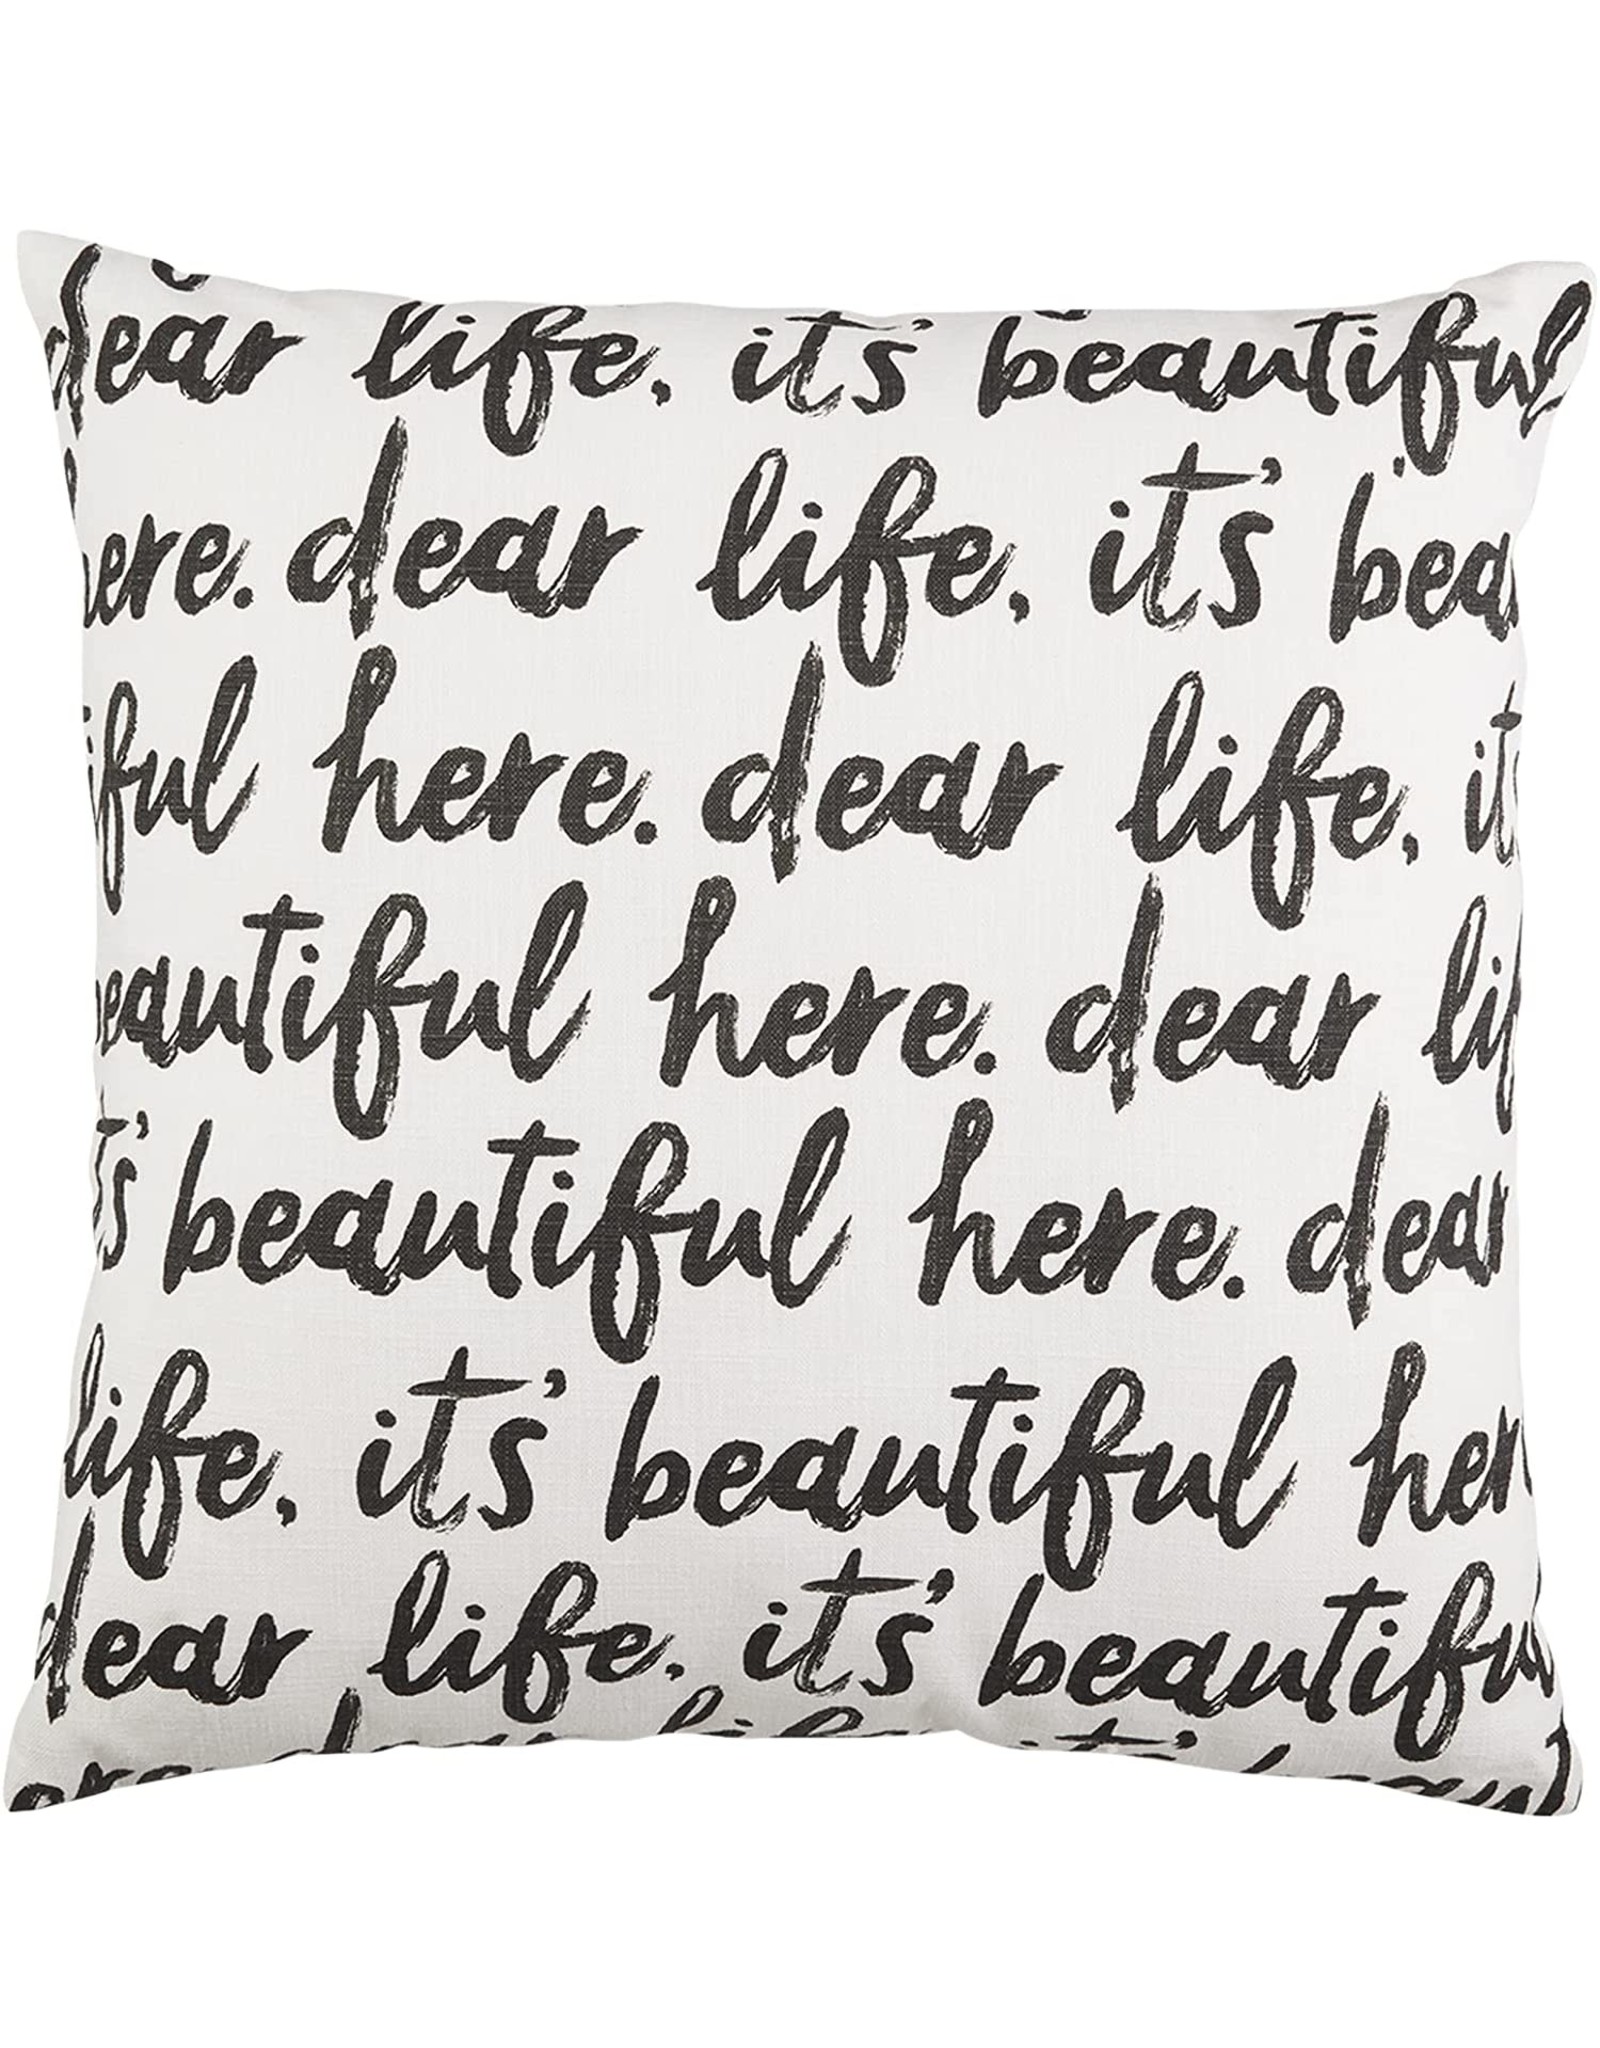 Mud Pie Dear Life Its Beautiful Here Pillow 22” Square Script Repeat